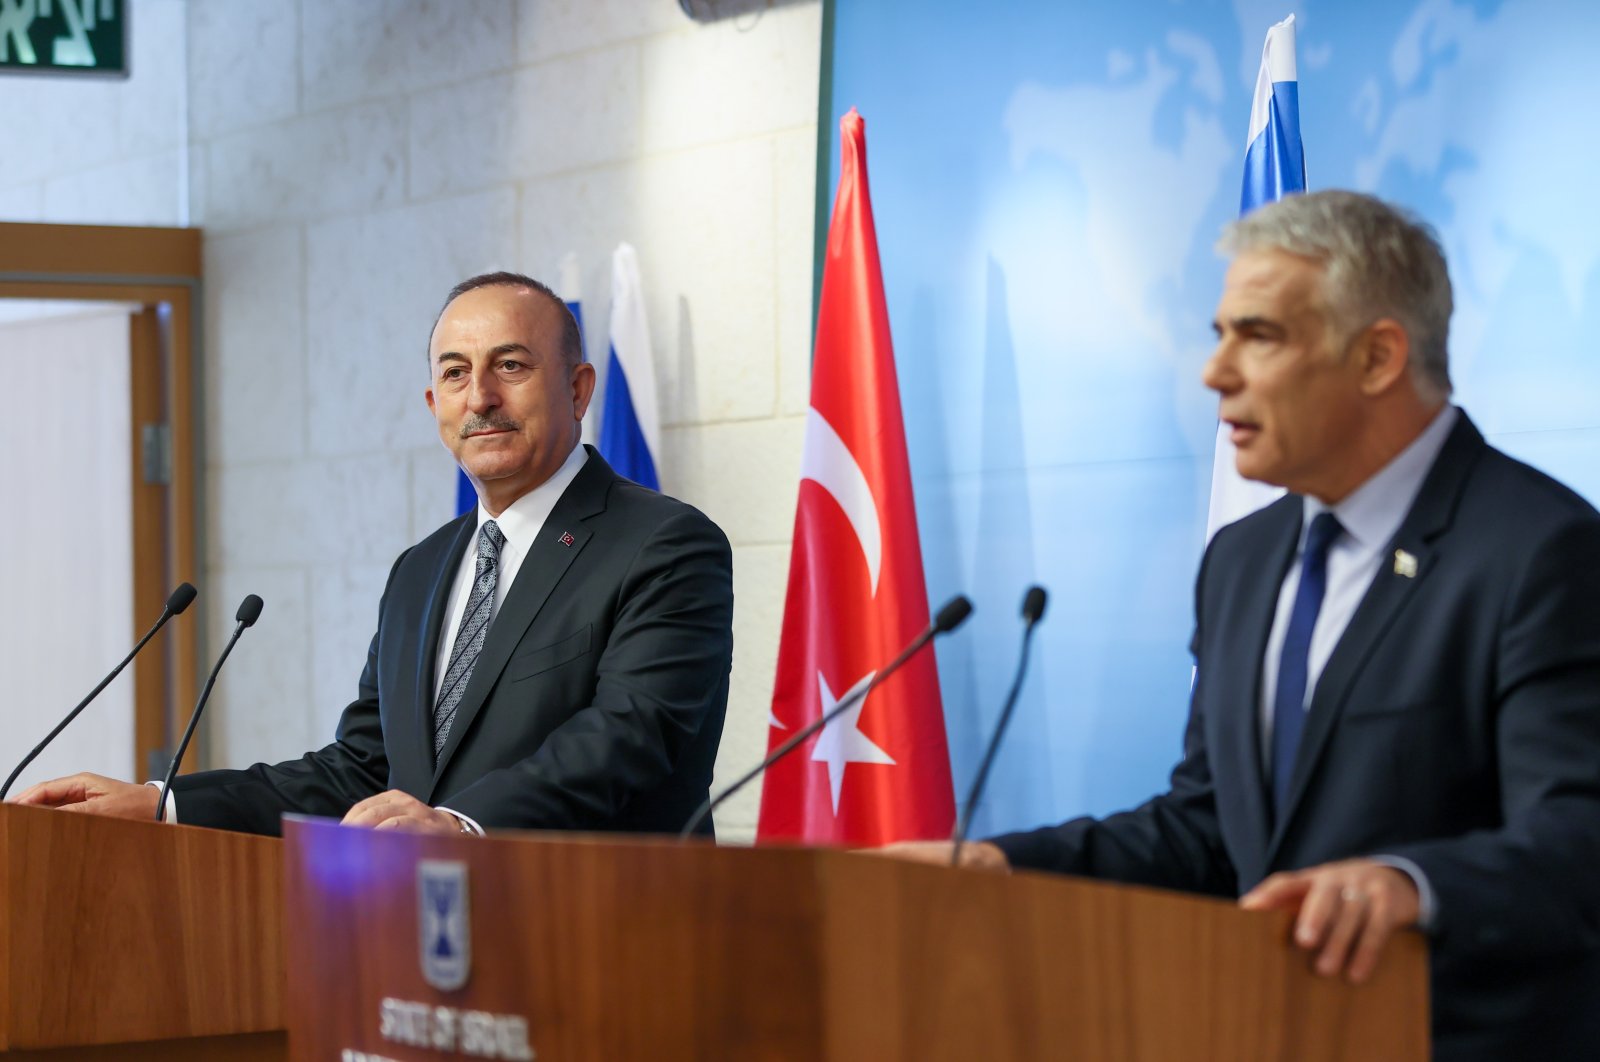 Foreign Minister Mevlüt Çavuşoğlu (L) speaks during a press conference with his Israeli counterpart Yair Lapid in Israel, May 25, 2022. (AA Photo)